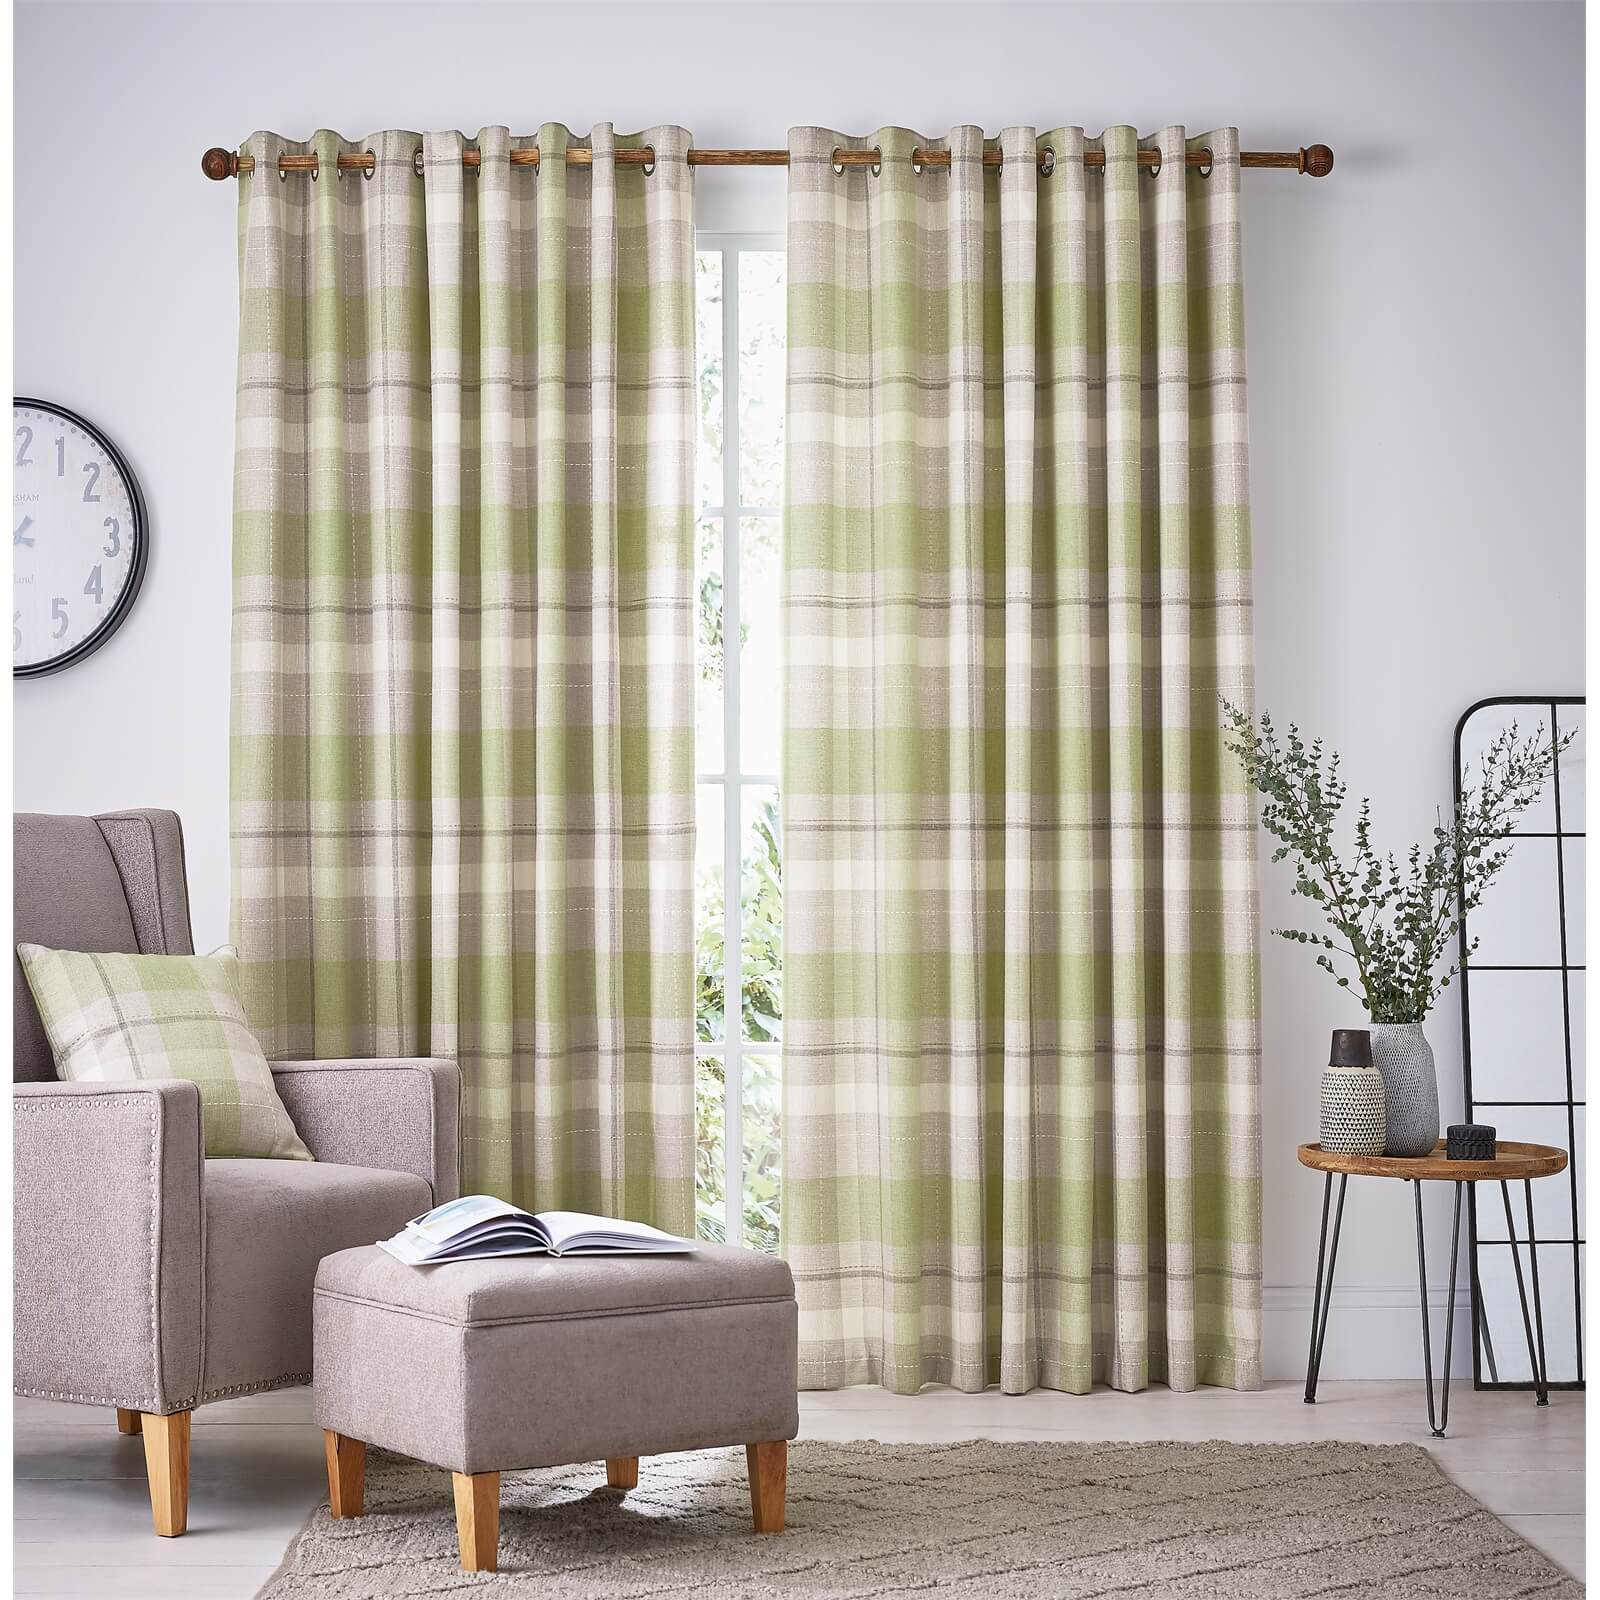 Helena Springfield Nora Lined Curtains 90 x 72 - Willow